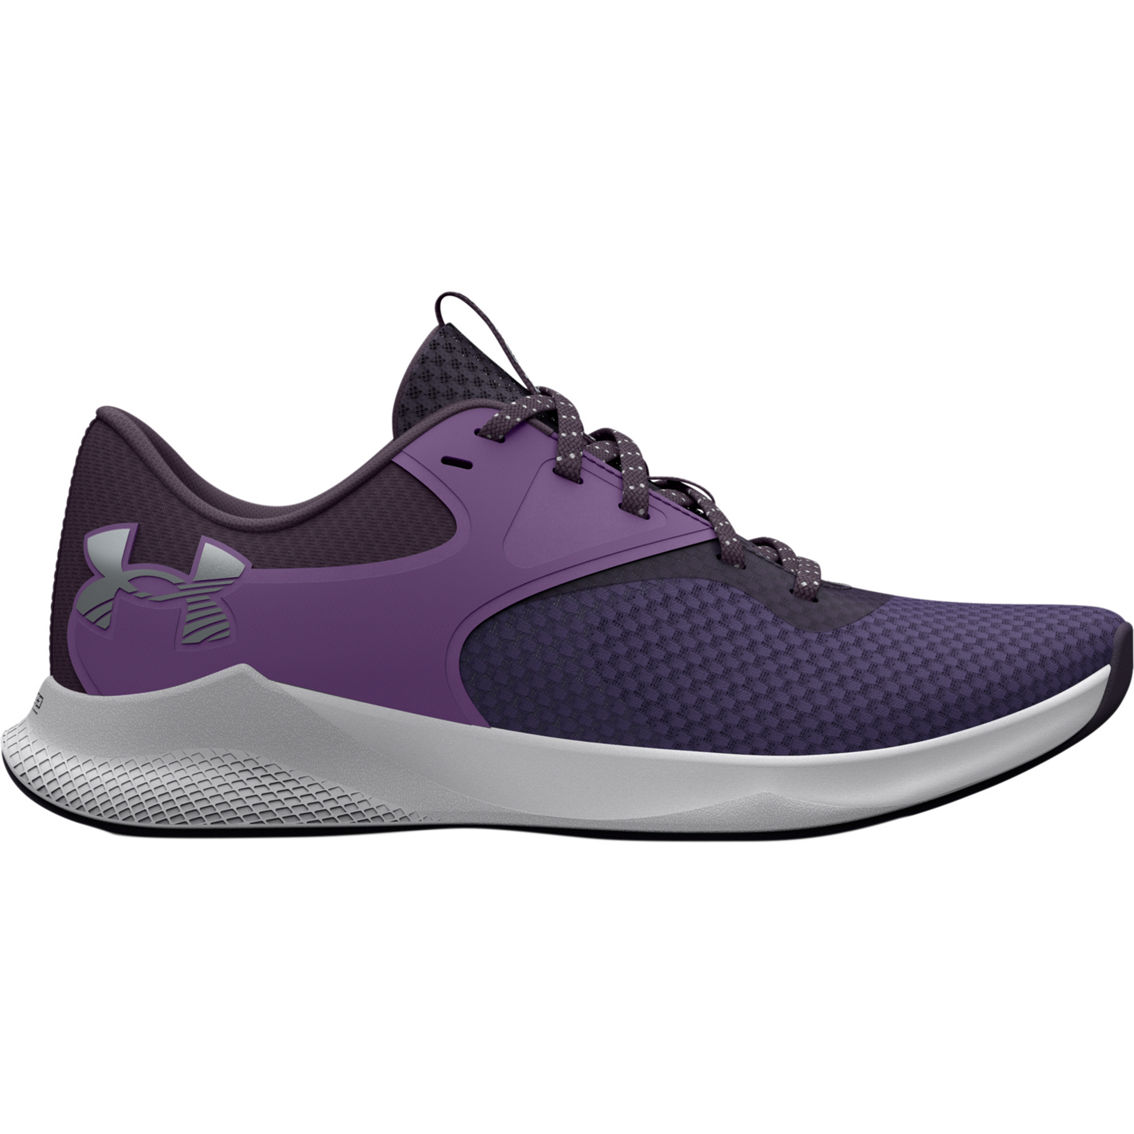 Under Armour Women's UA Charged Aurora 2 Training Shoes - Image 2 of 5